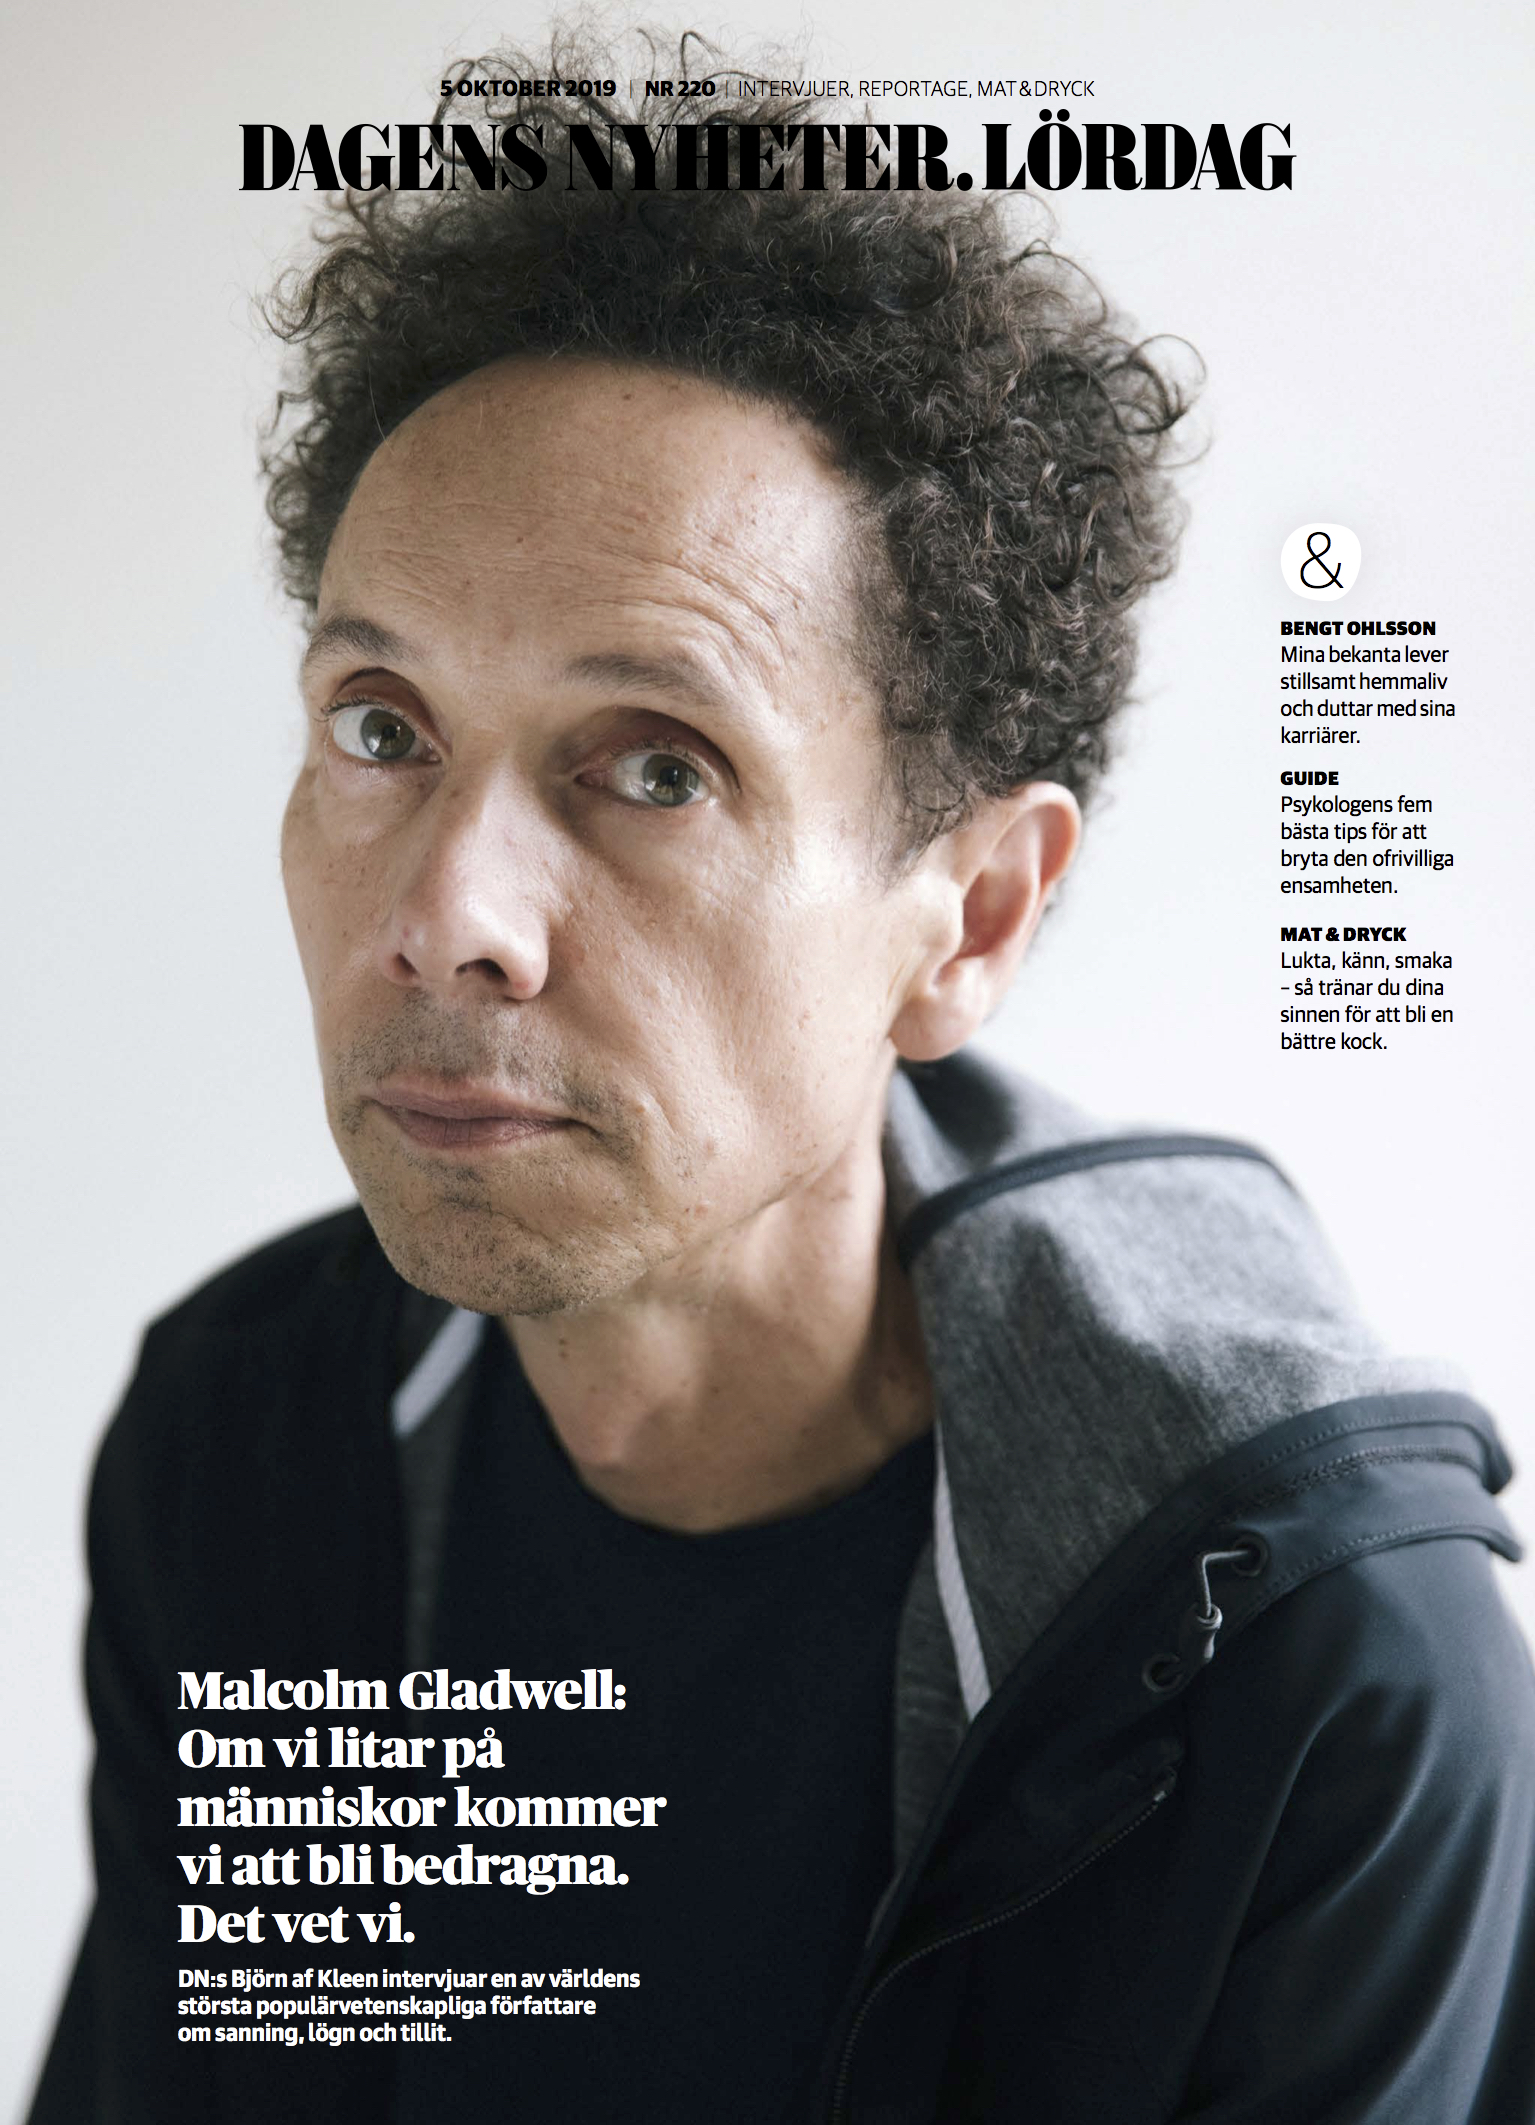 Cover photo of author Malcolm Gladwell by Emil Wesolowski for Dagens Nyheter.